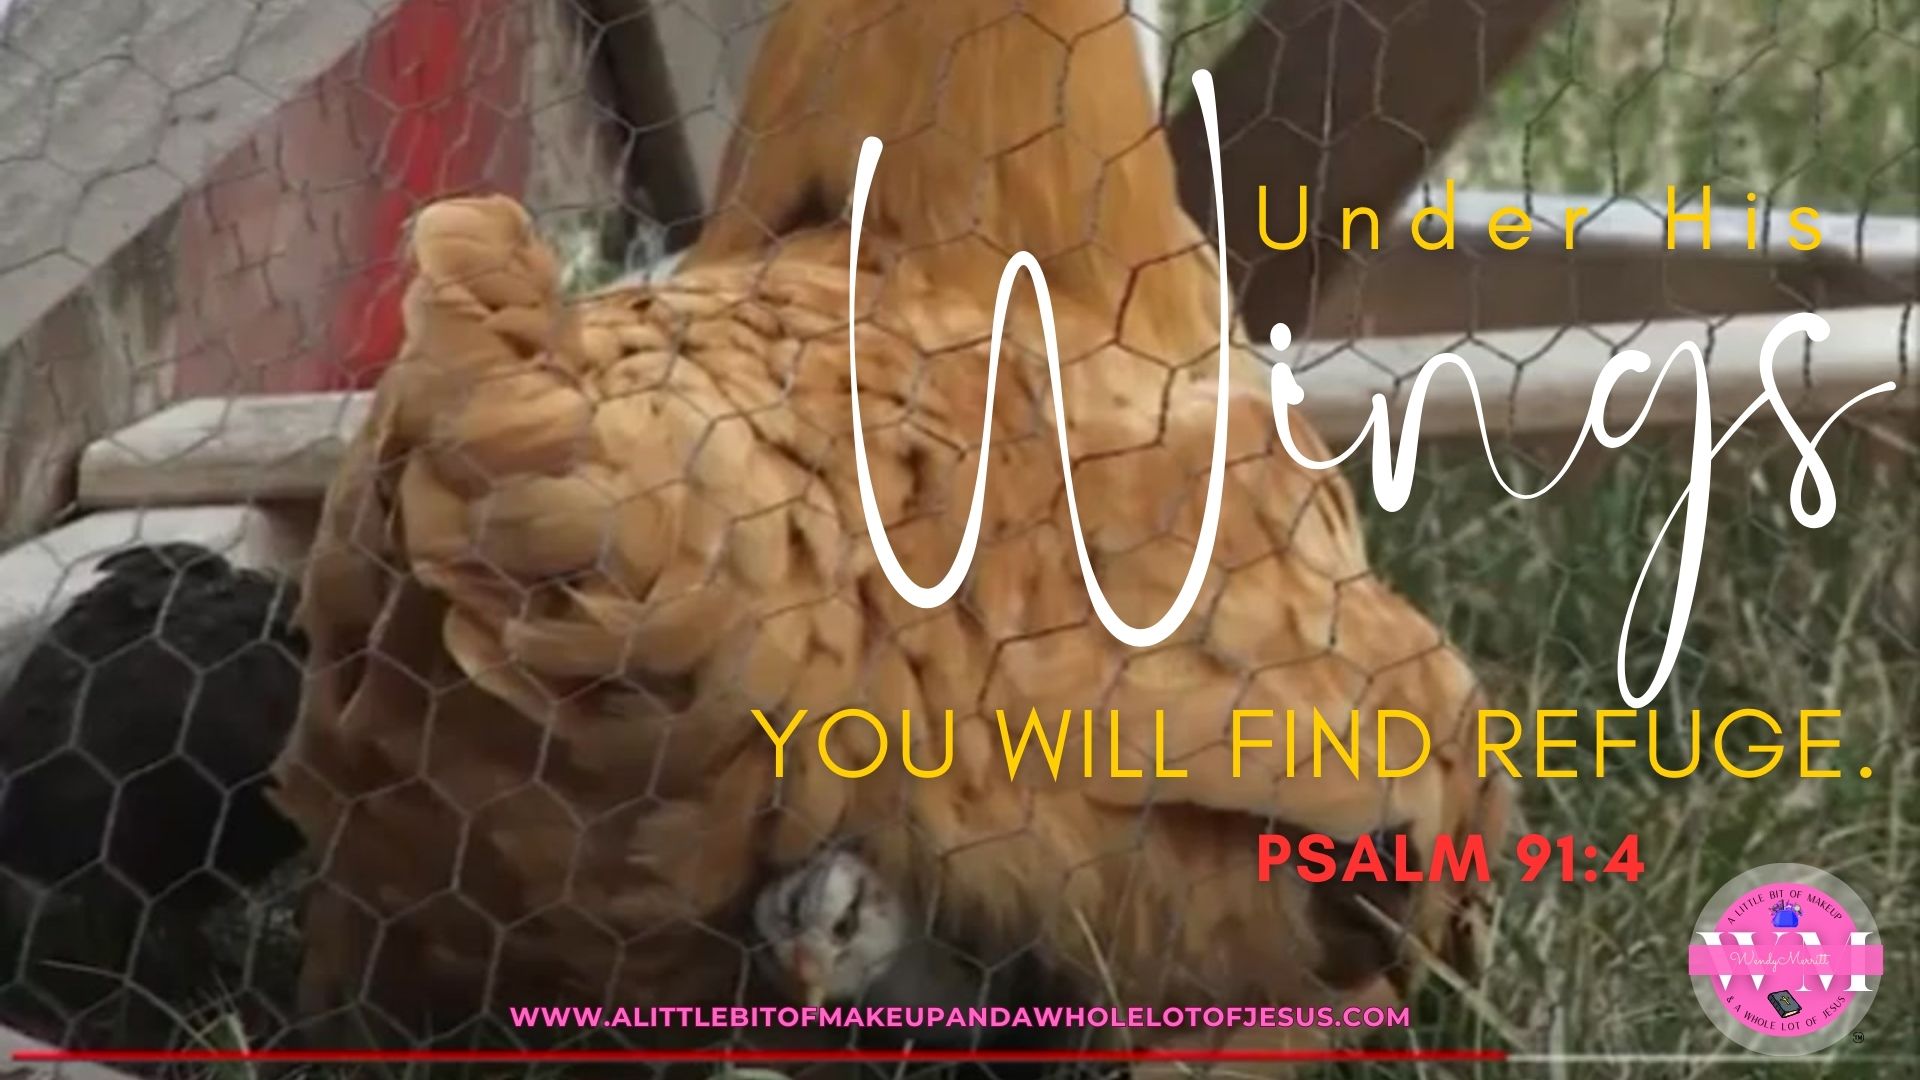 Under his wings you will find refuge